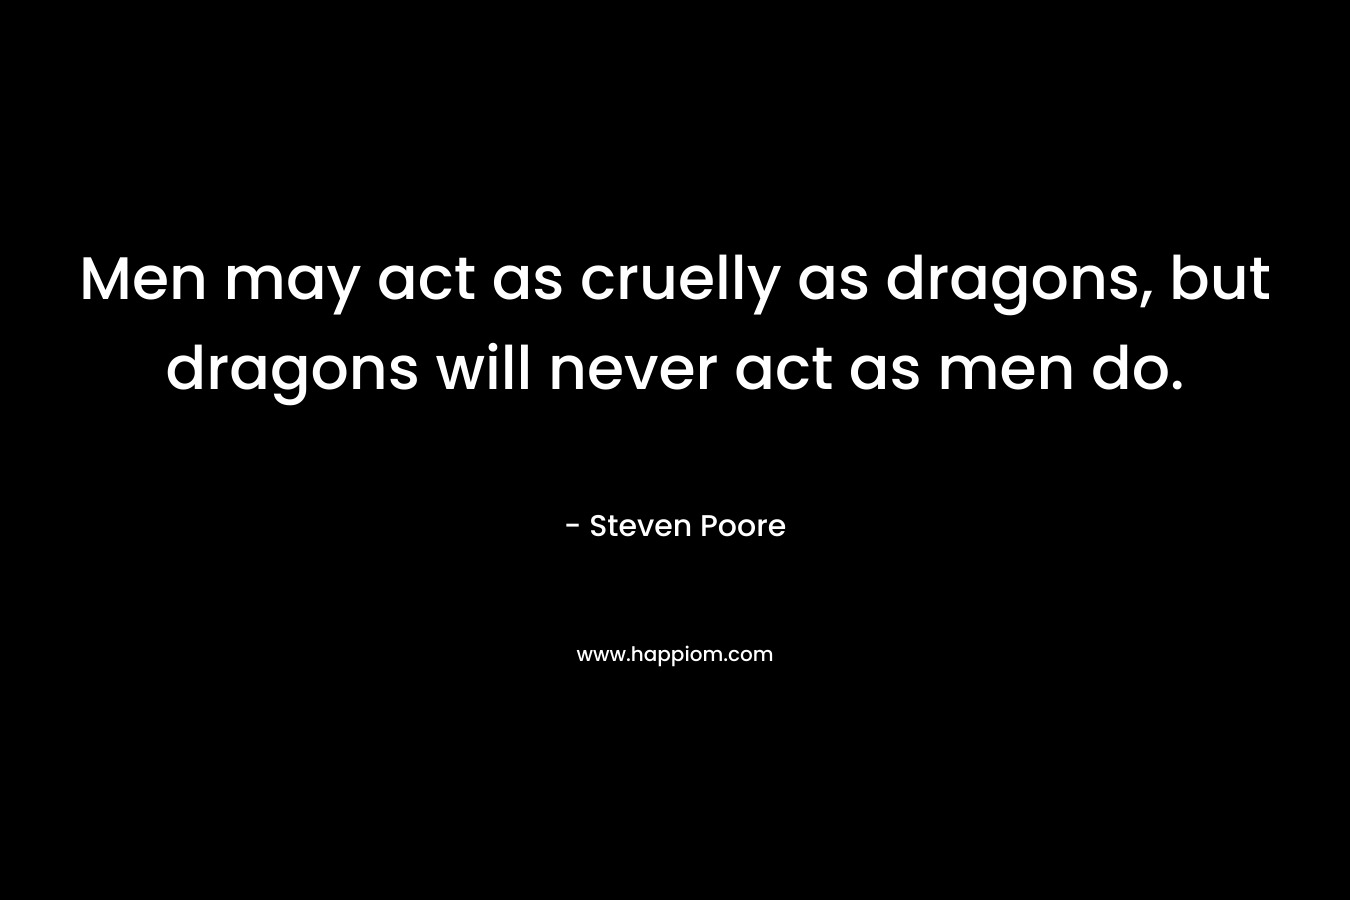 Men may act as cruelly as dragons, but dragons will never act as men do.